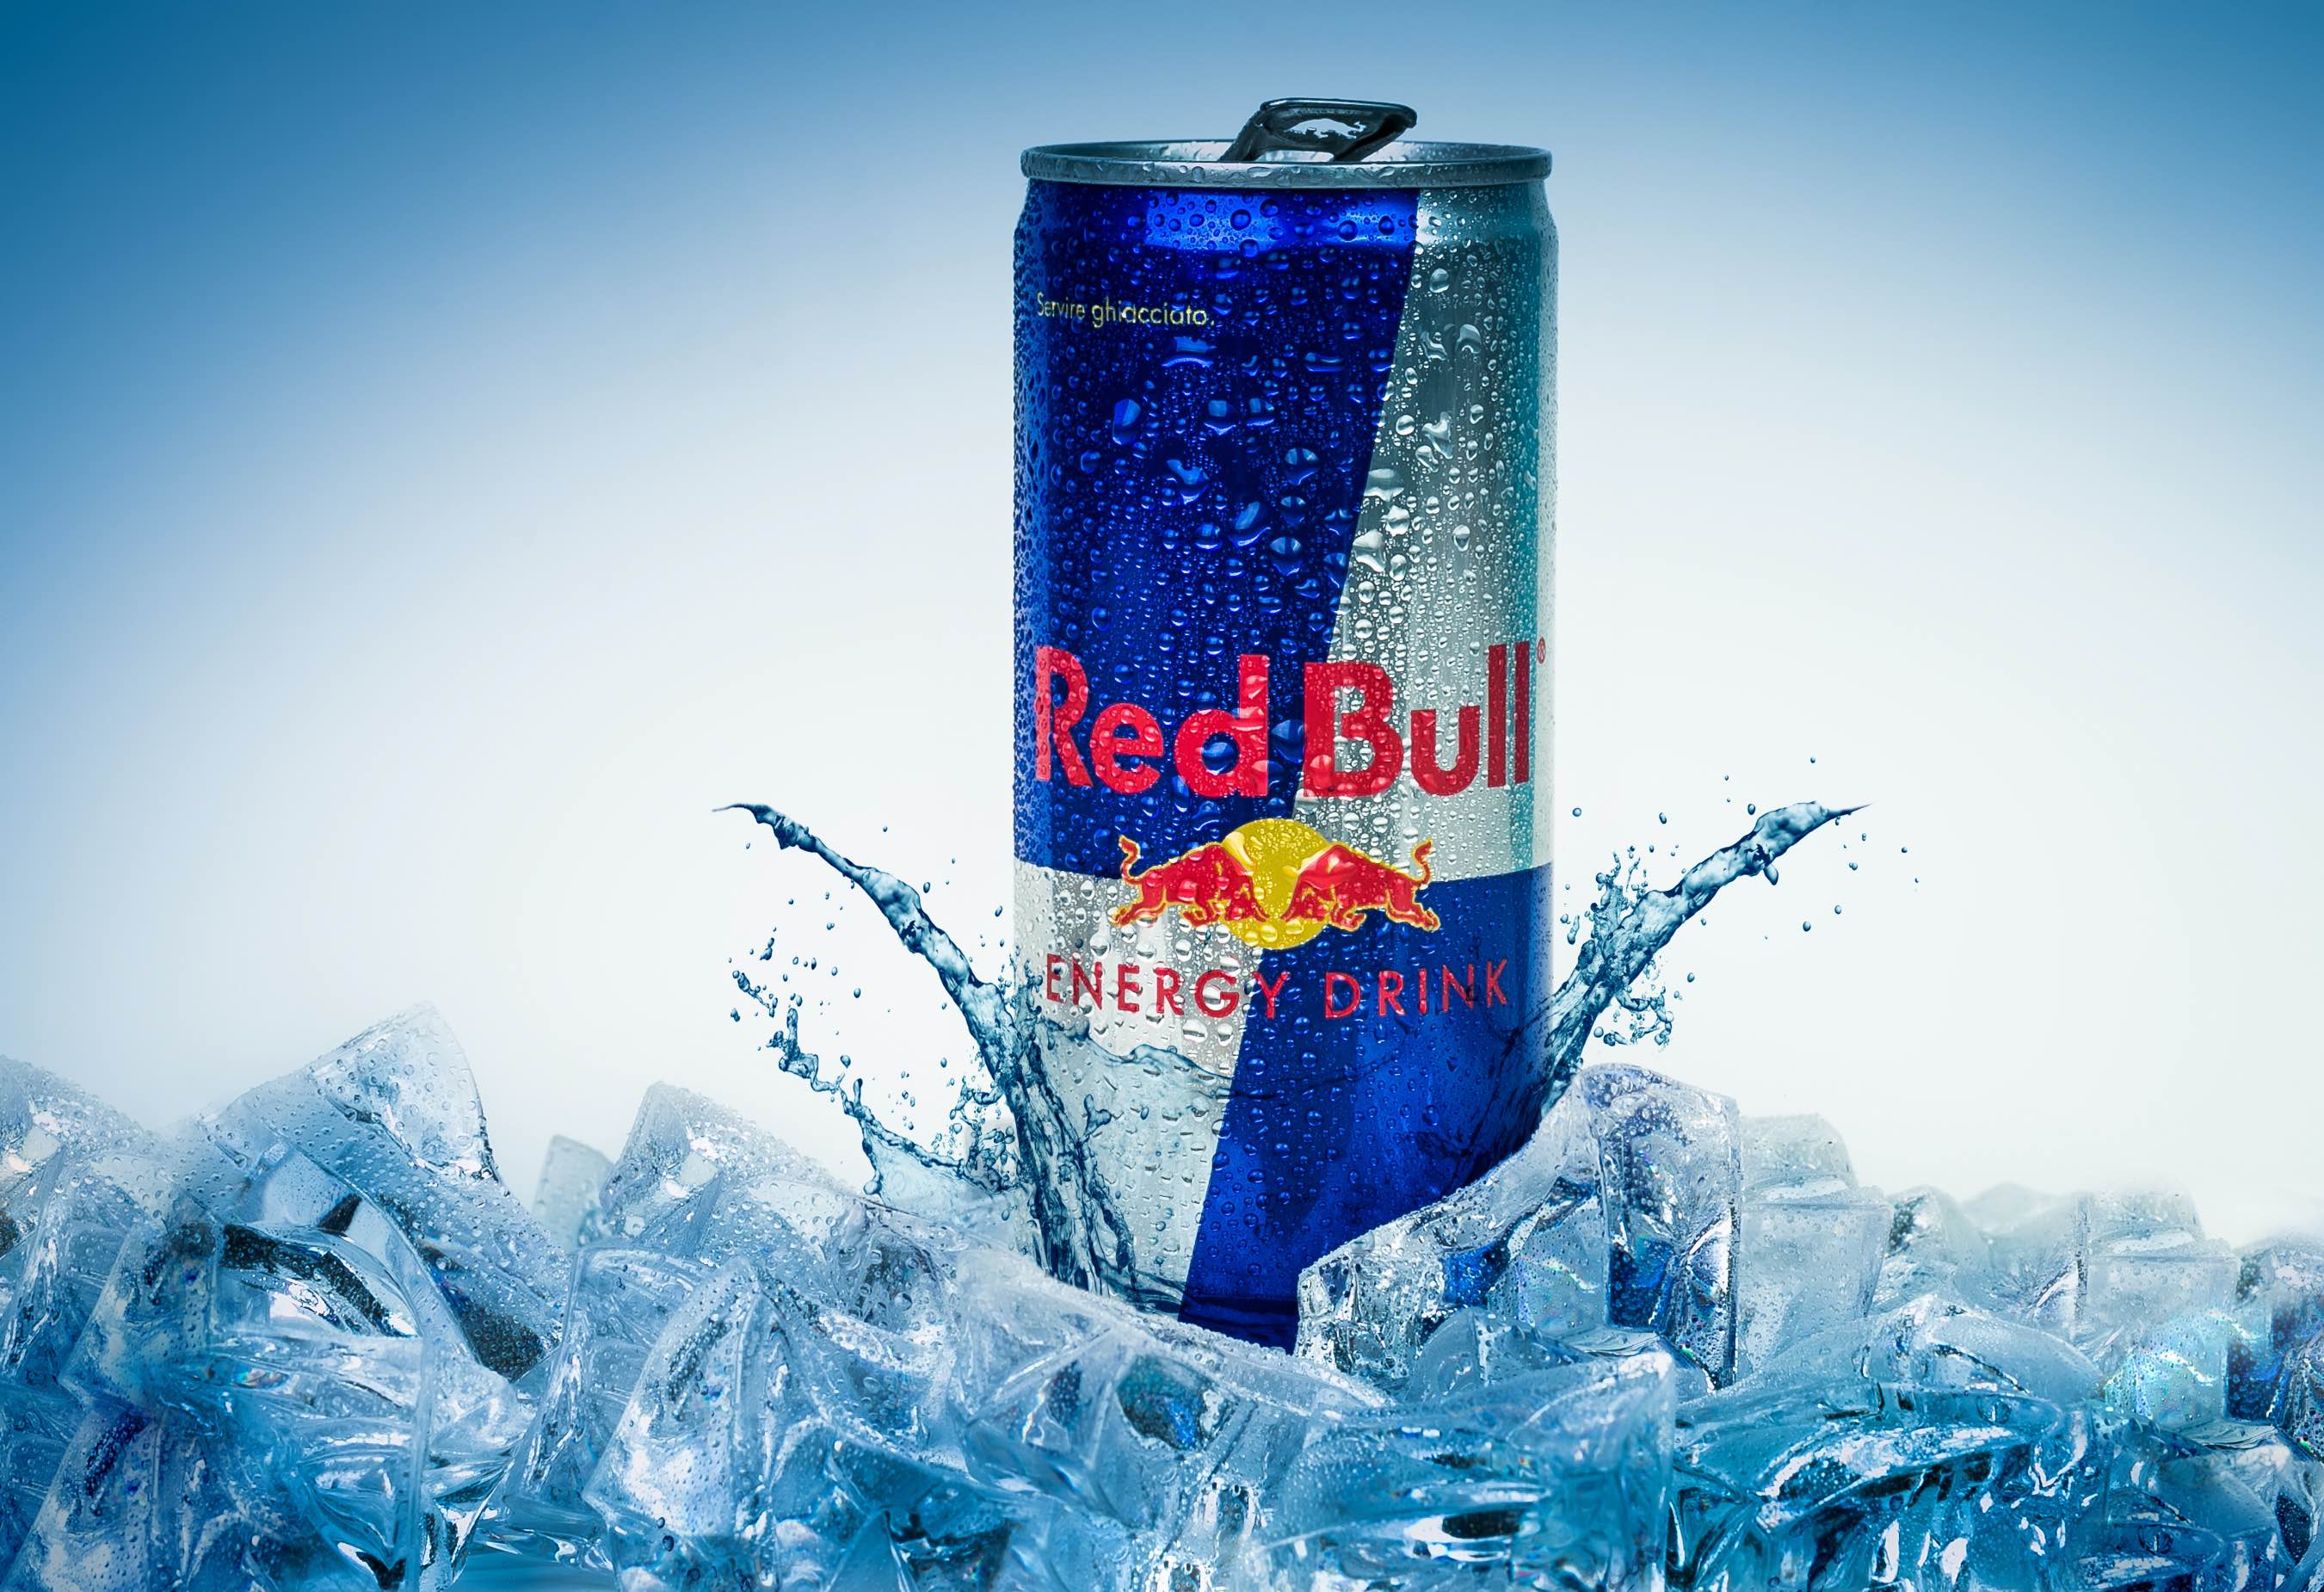 10 Red Bull Nutrition Facts You Need to Know